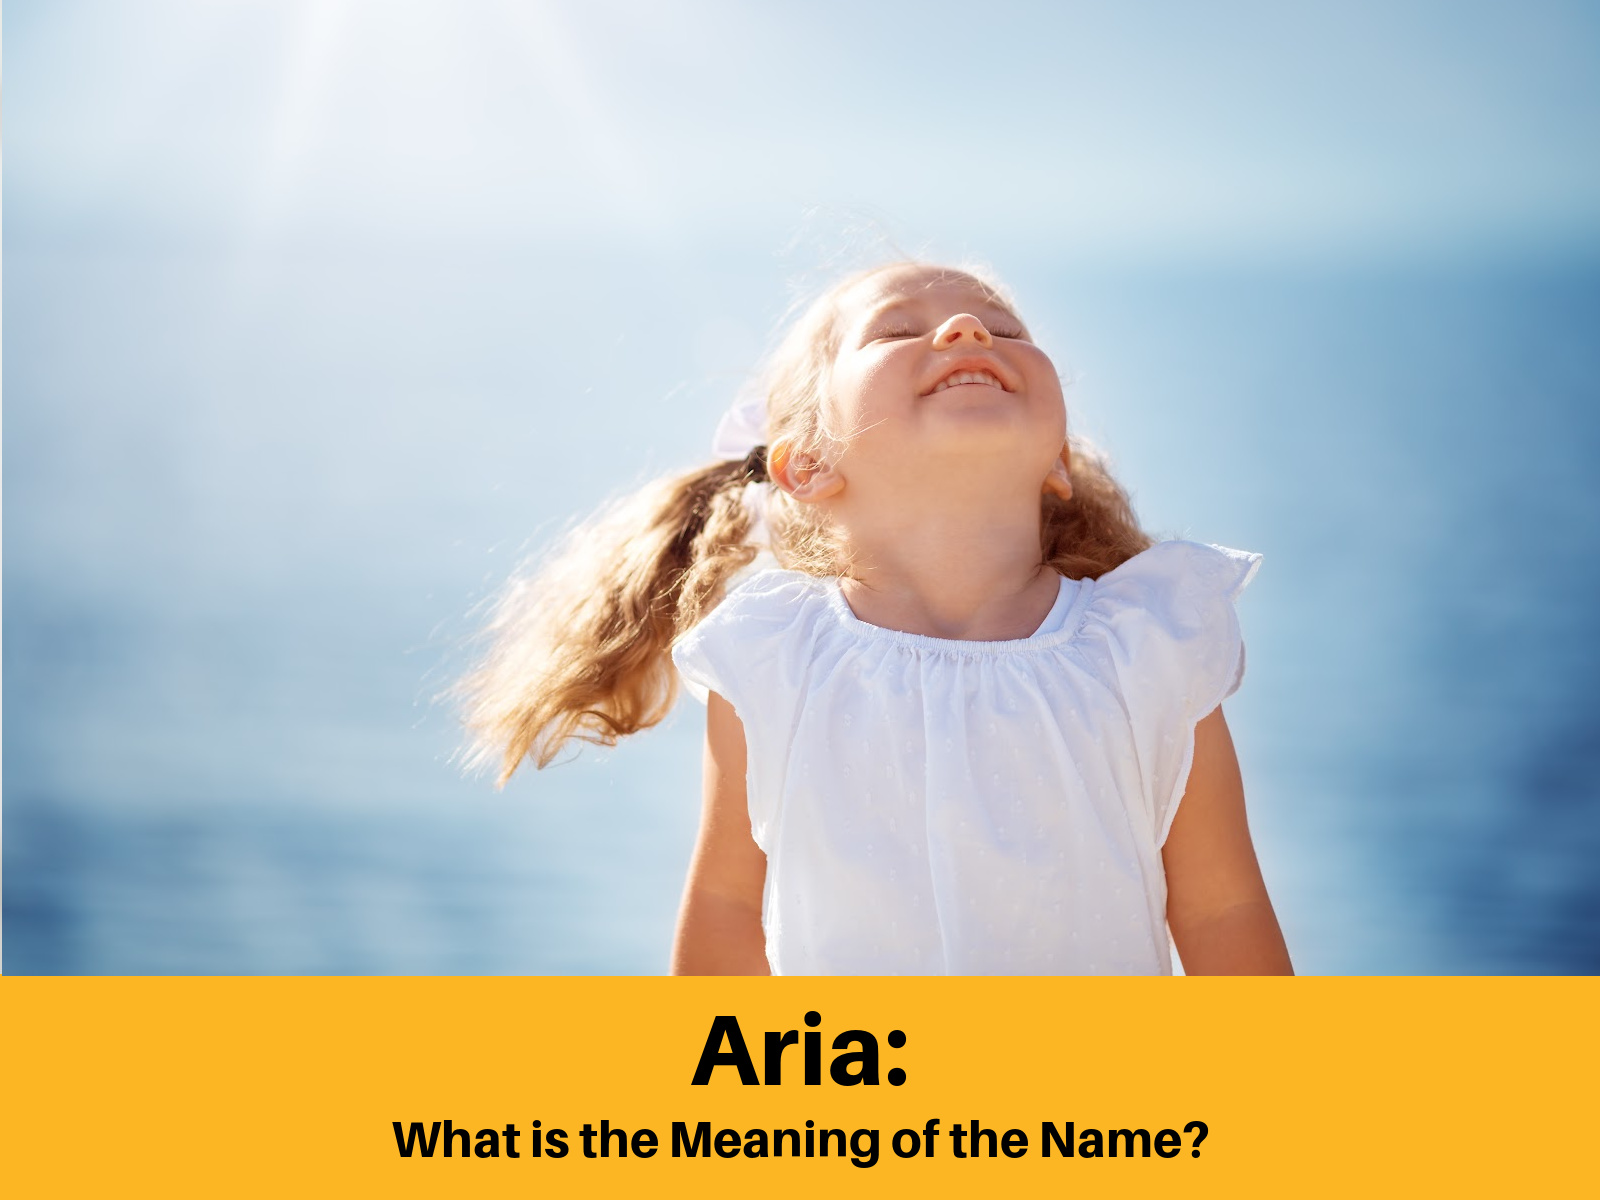 The meaning of name Aria